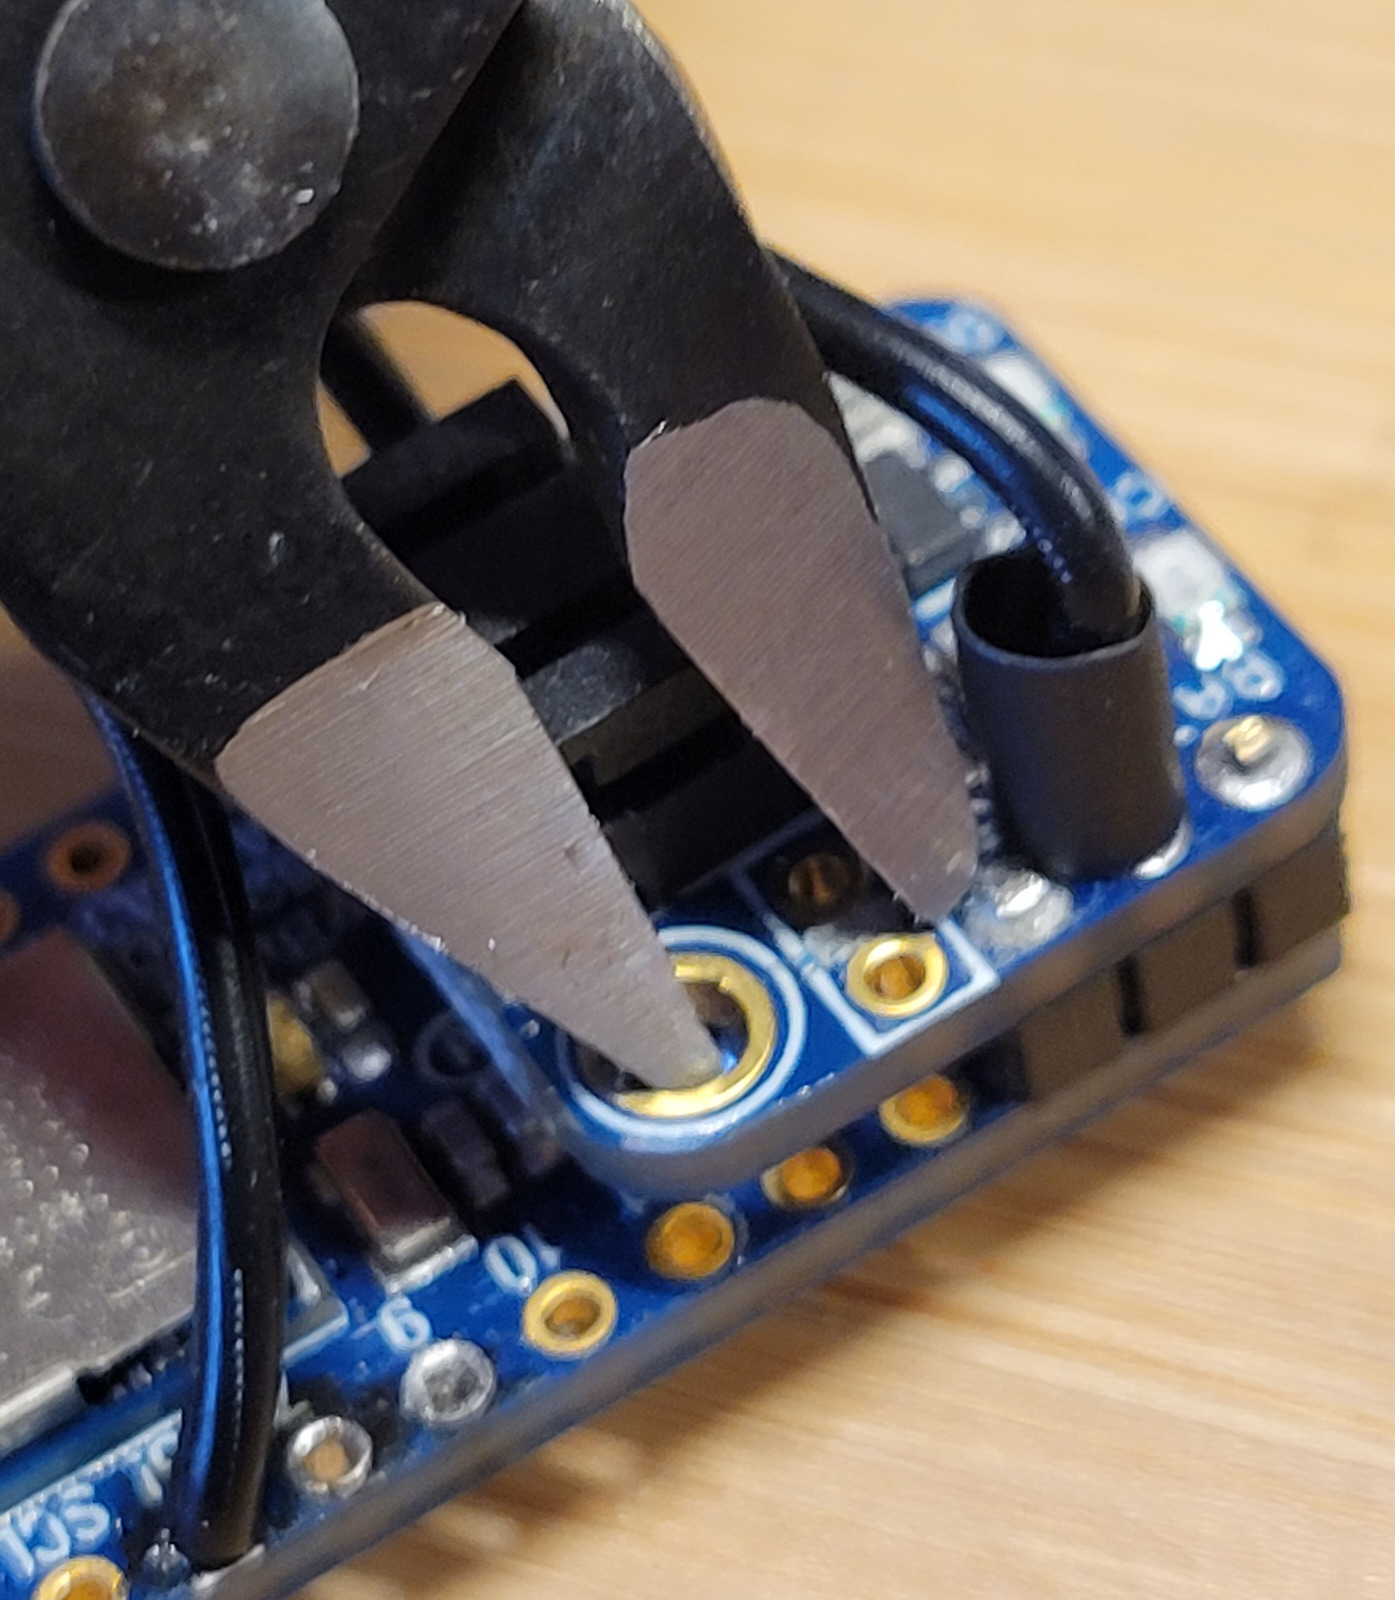 Using the flush cutter to cut the trace of the LiPo Backpack. One 'tooth' of the cutter is inside the mounting hole while the other drags across the trace to cut it.